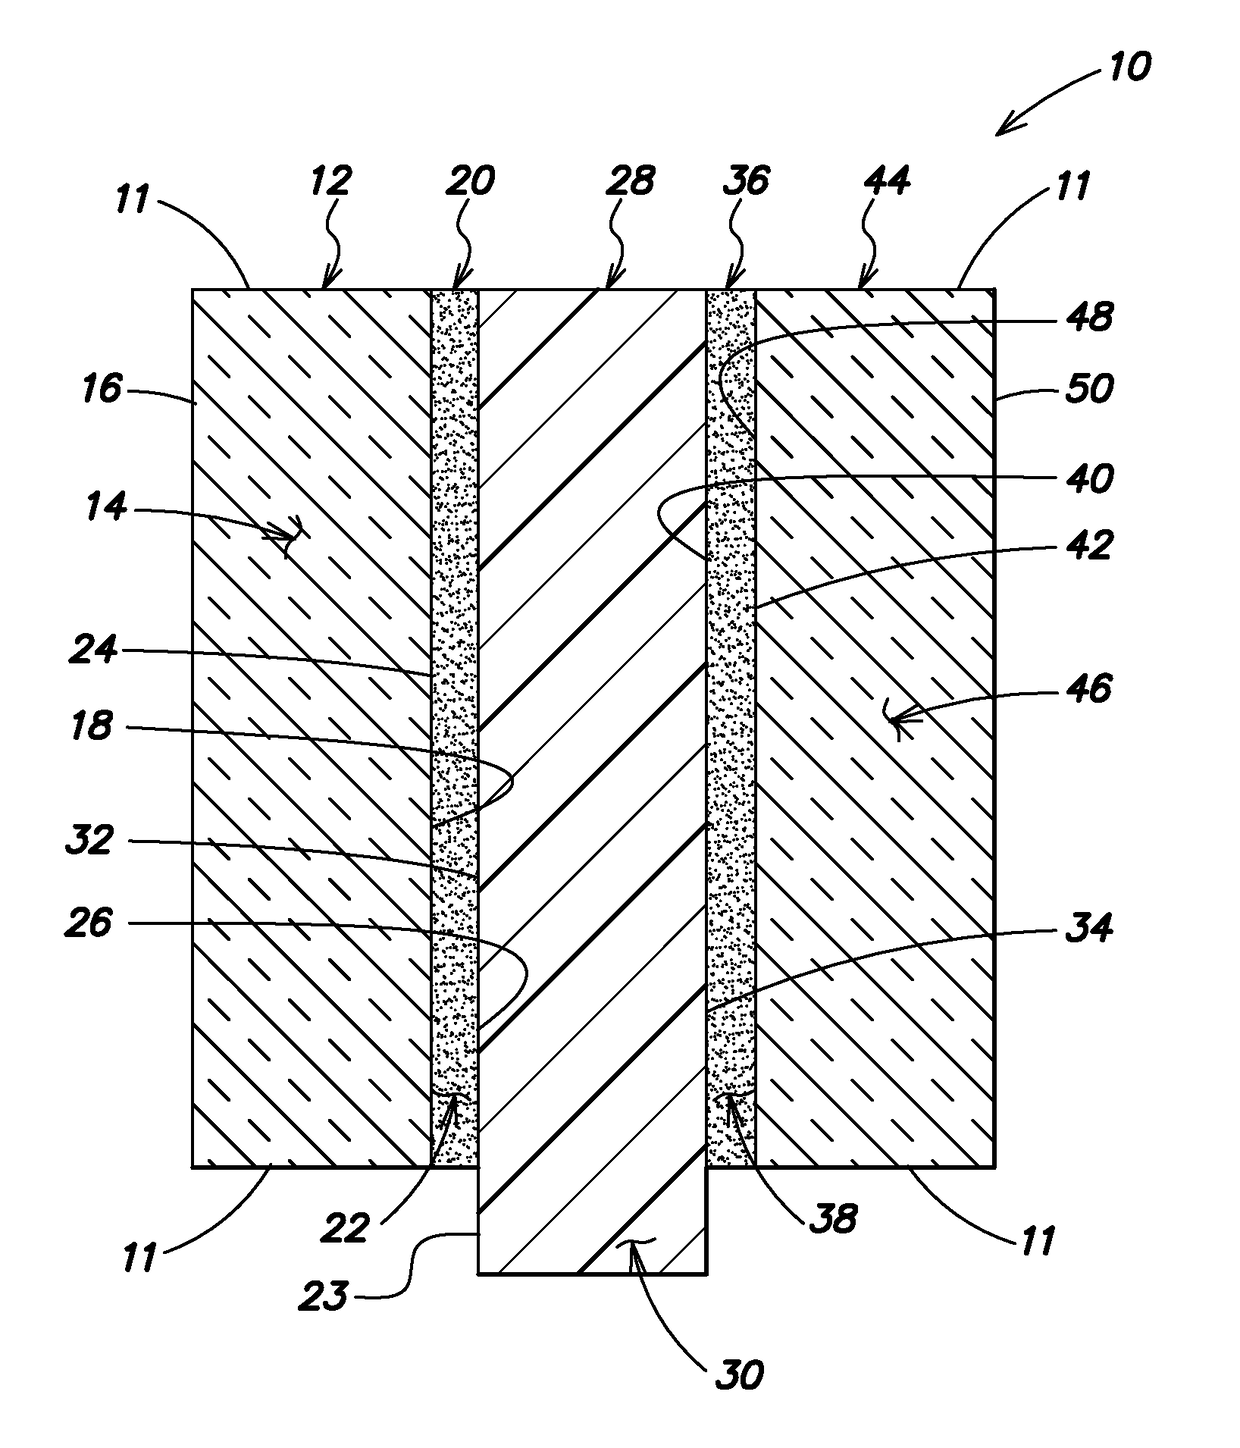 Shatter-resistant, optically-transparent panels and methods of use of the panels for on-site retrofitting and reinforcing of passageways